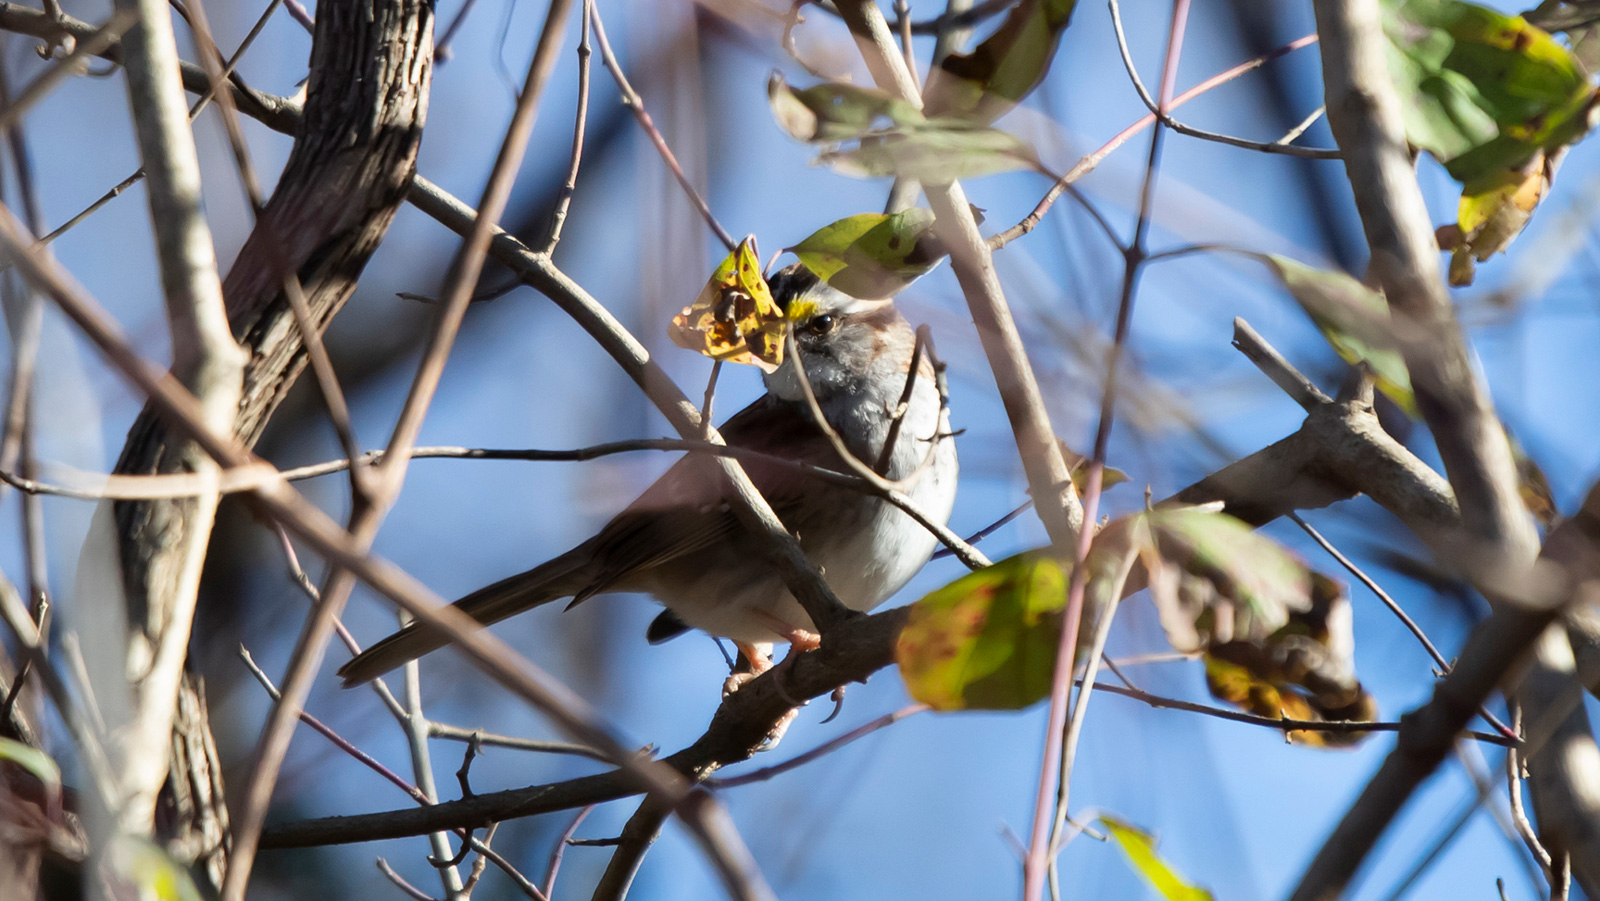 White-throated sparrow standing on a limb